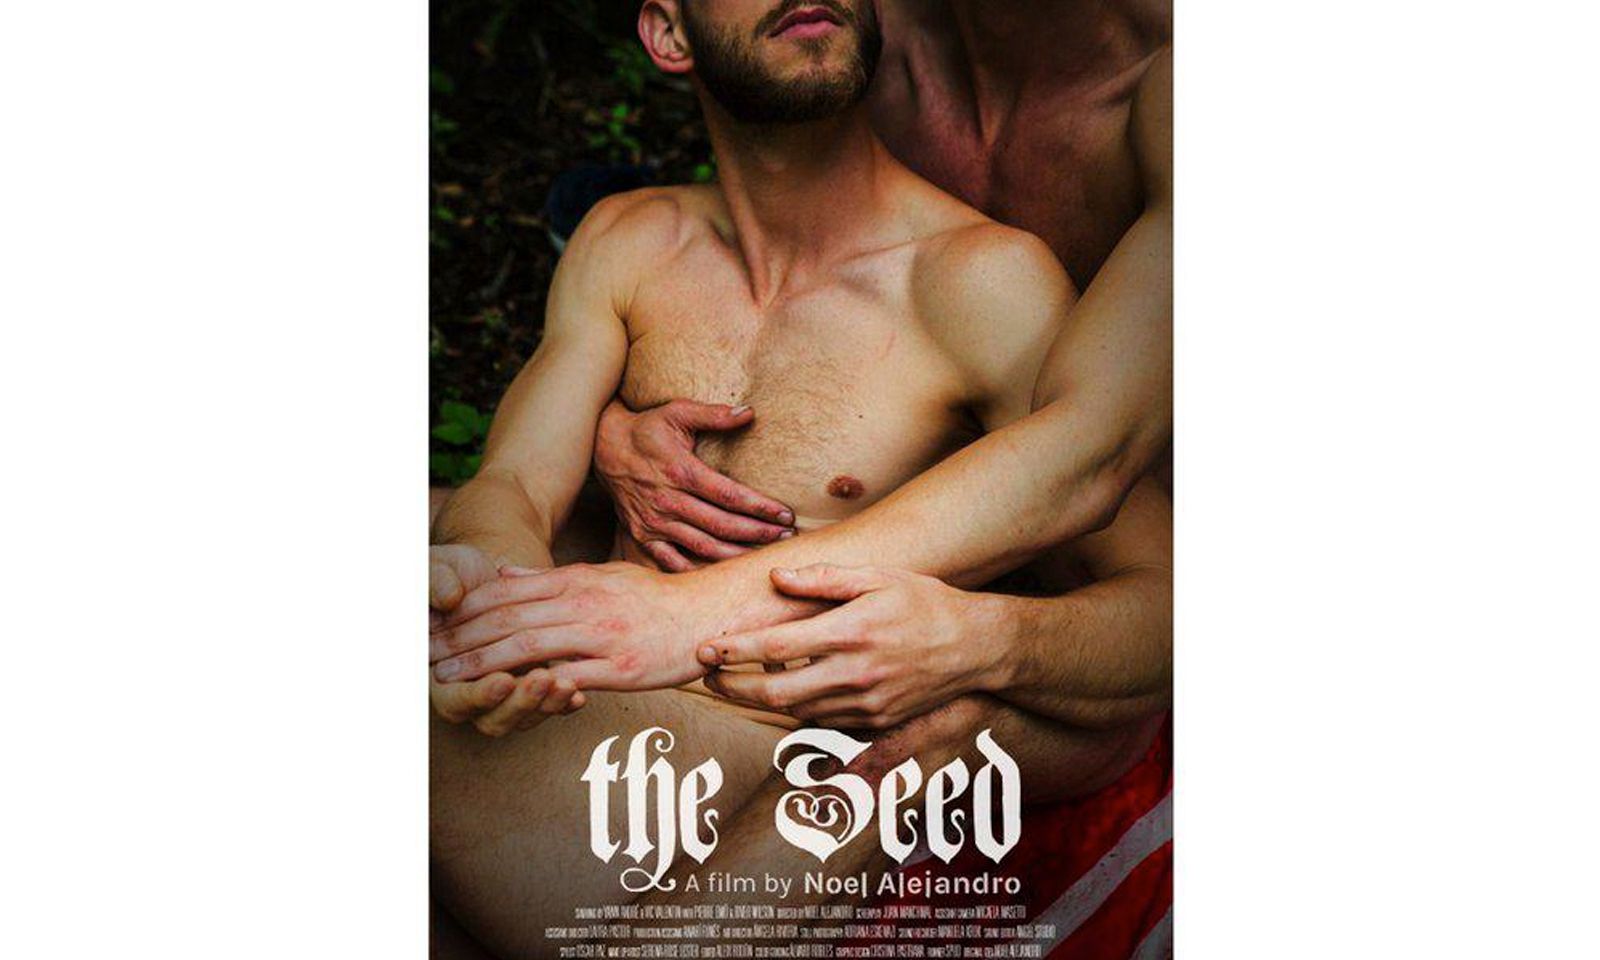 ‘The Seed’ From Noel Alejandro Debuts Today